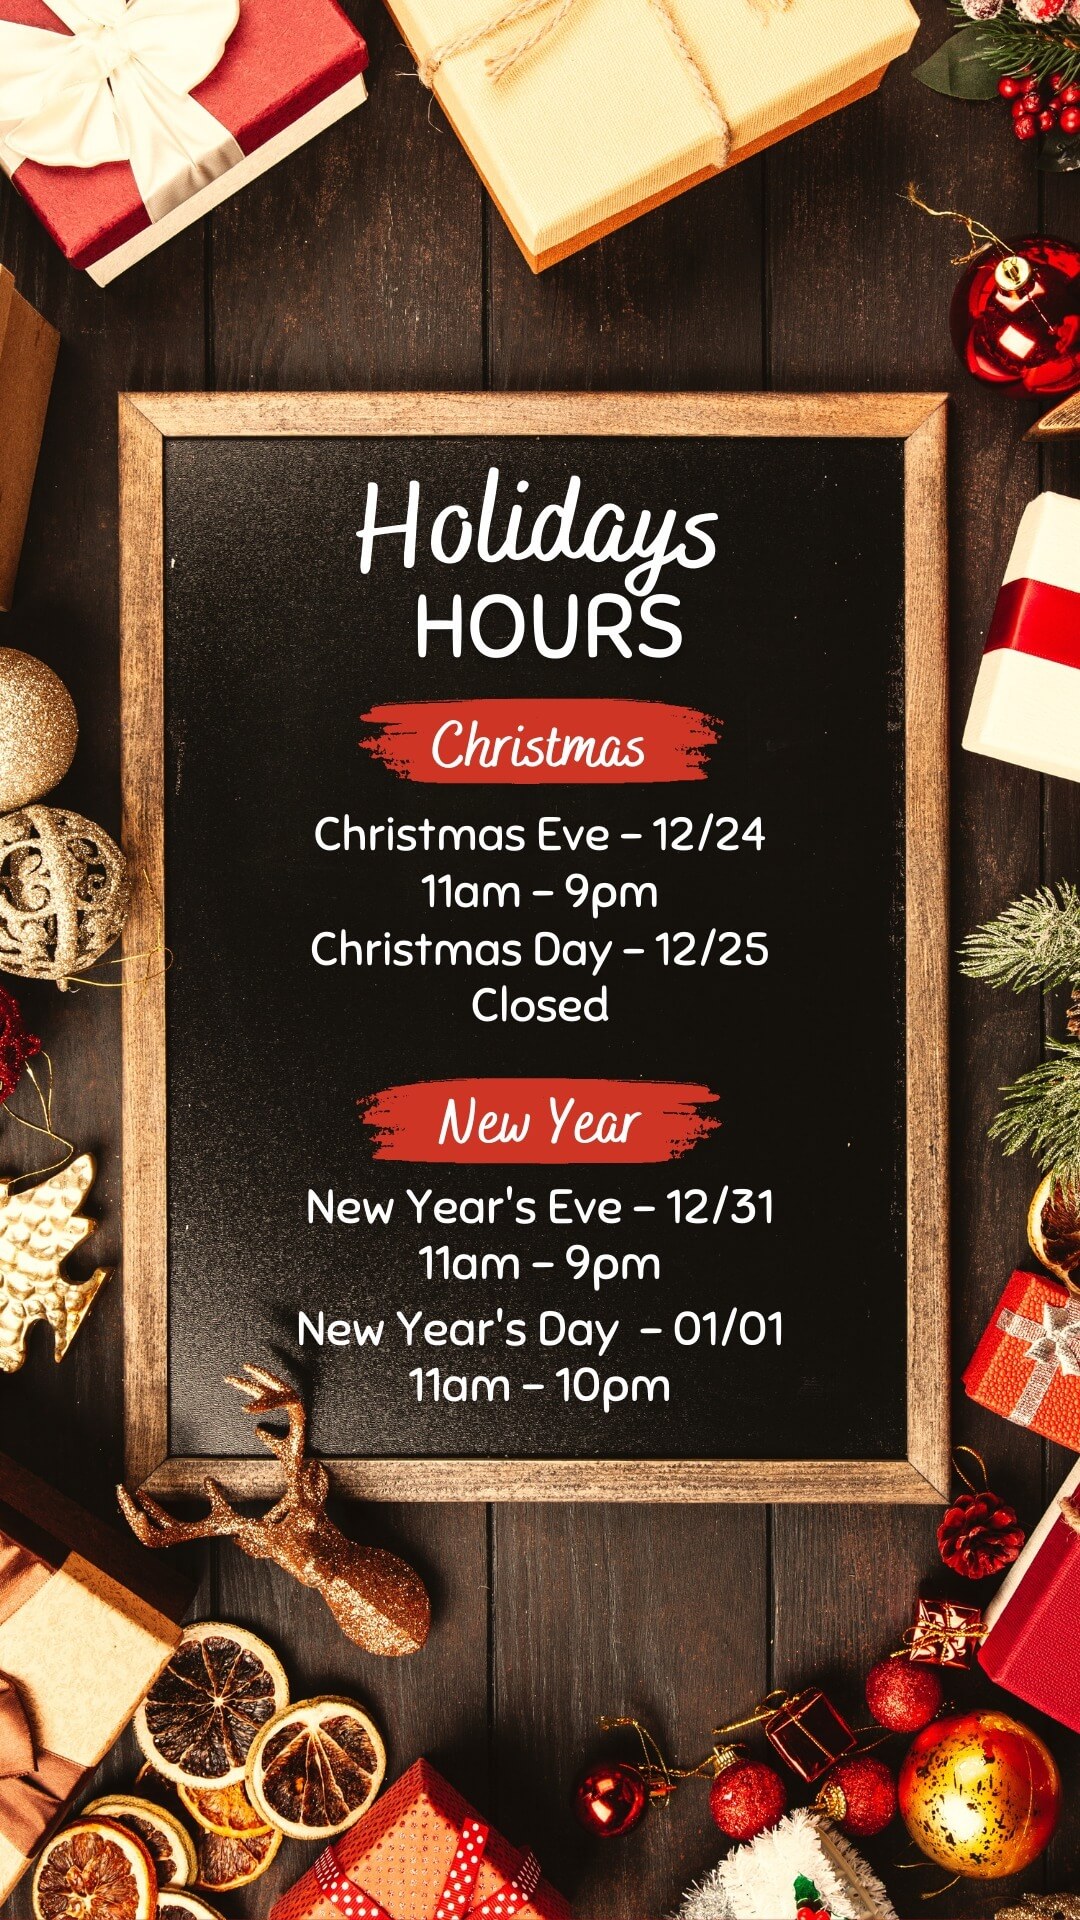 Mountain State Brewing DCL Holiday Schedule